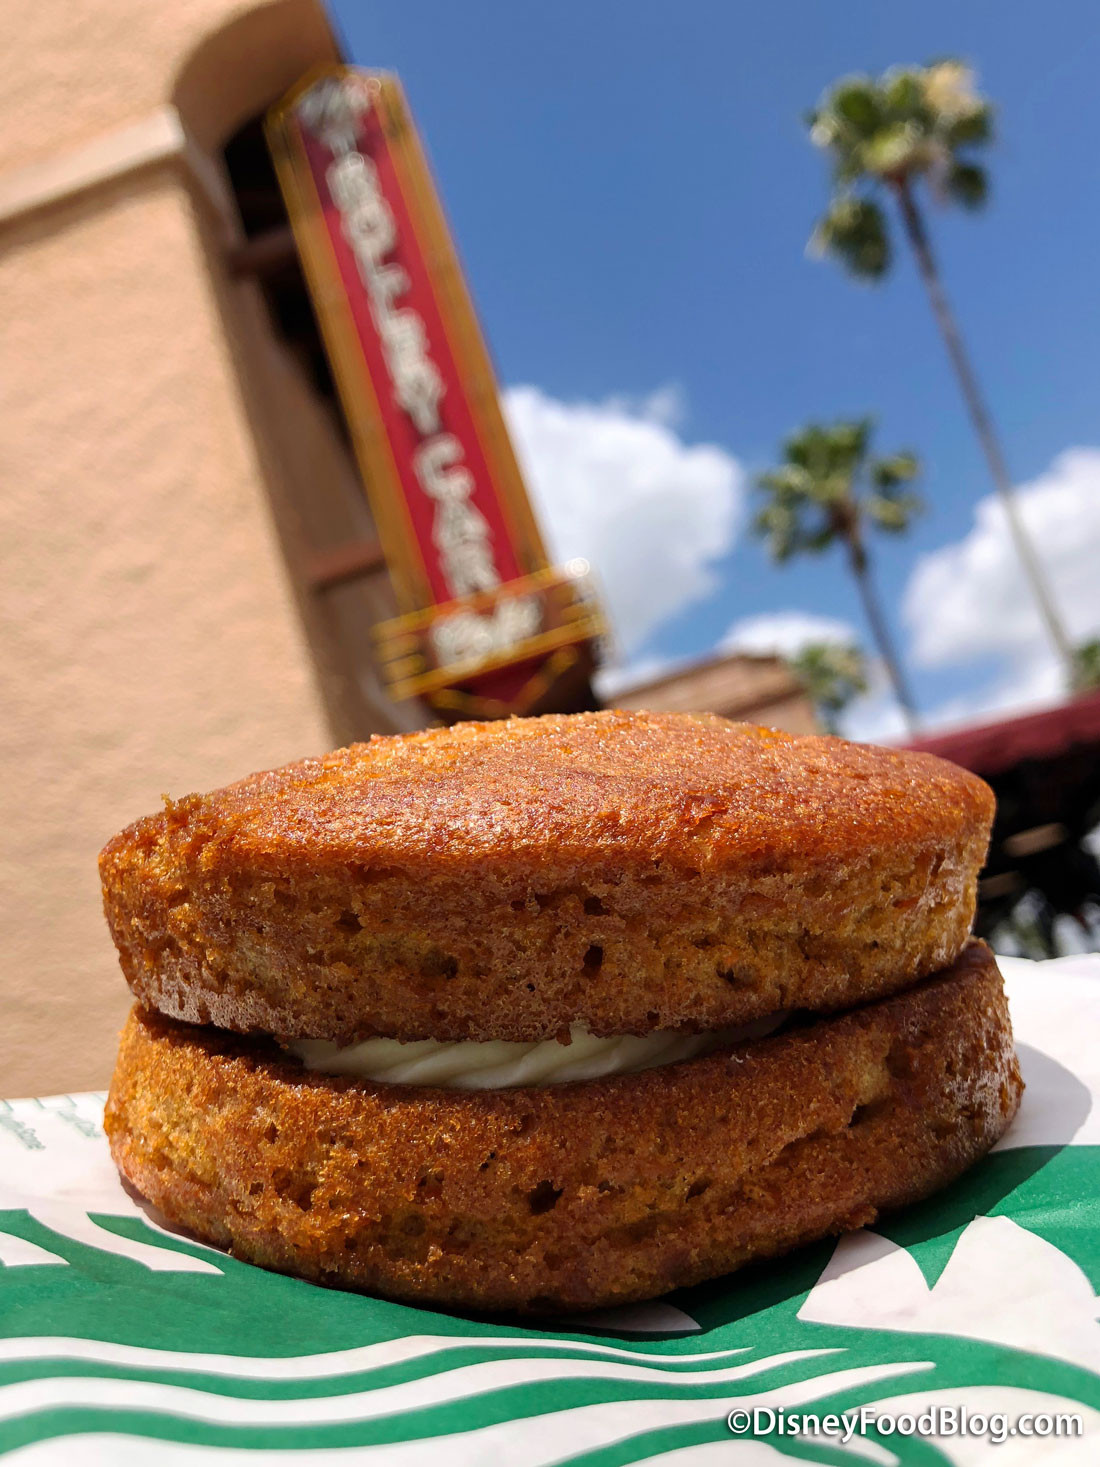 Carrot Cake Cookie Disney
 Disney World’s Iconic Carrot Cake Cookie Sees Big Changes